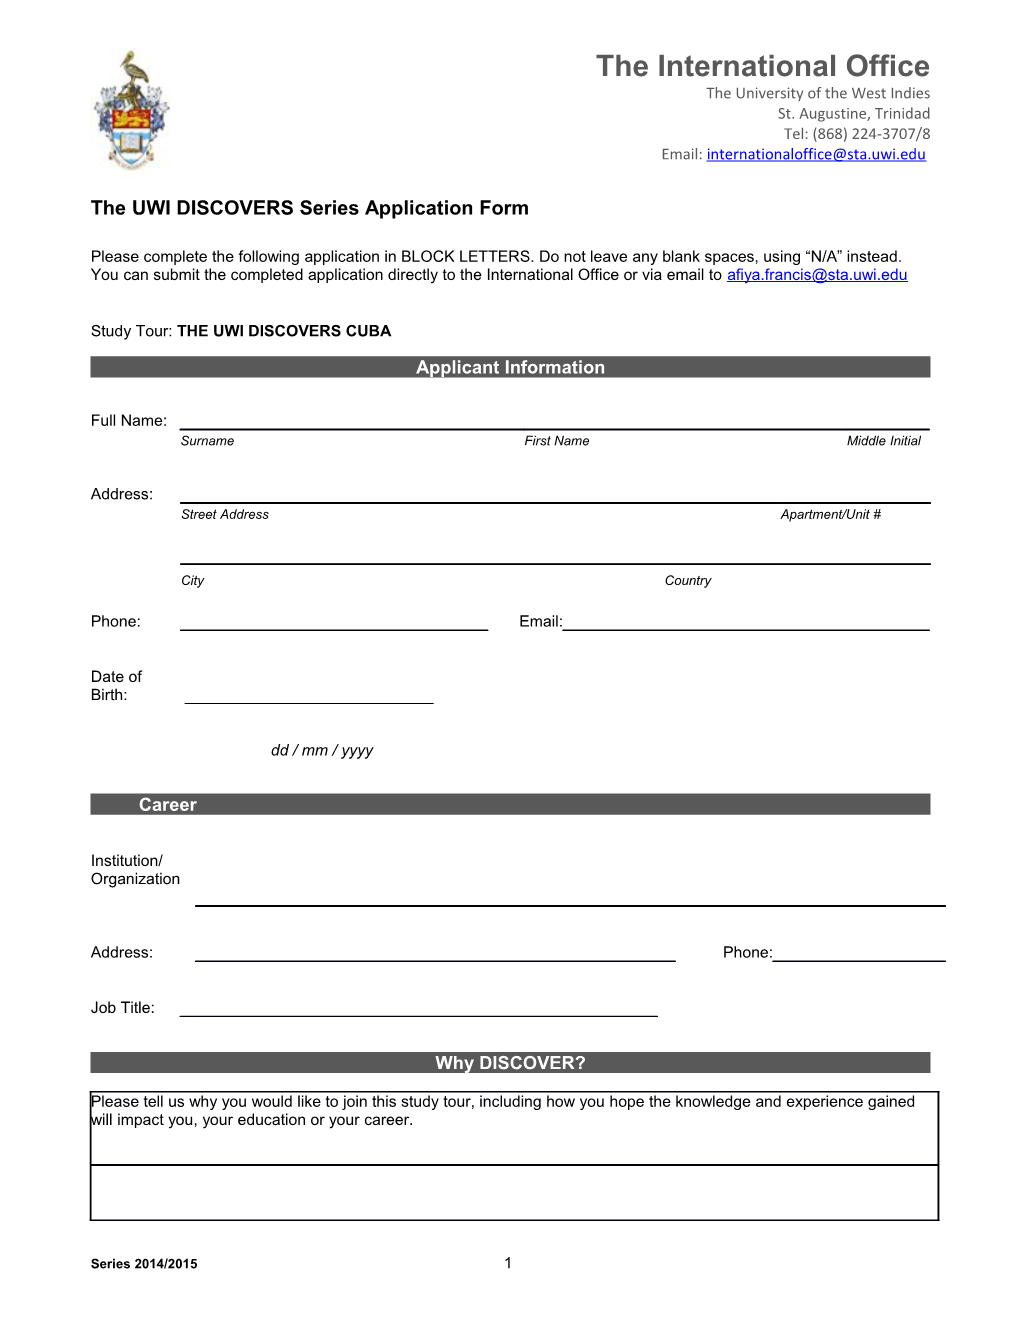 The Uwidiscoversseries Application Form